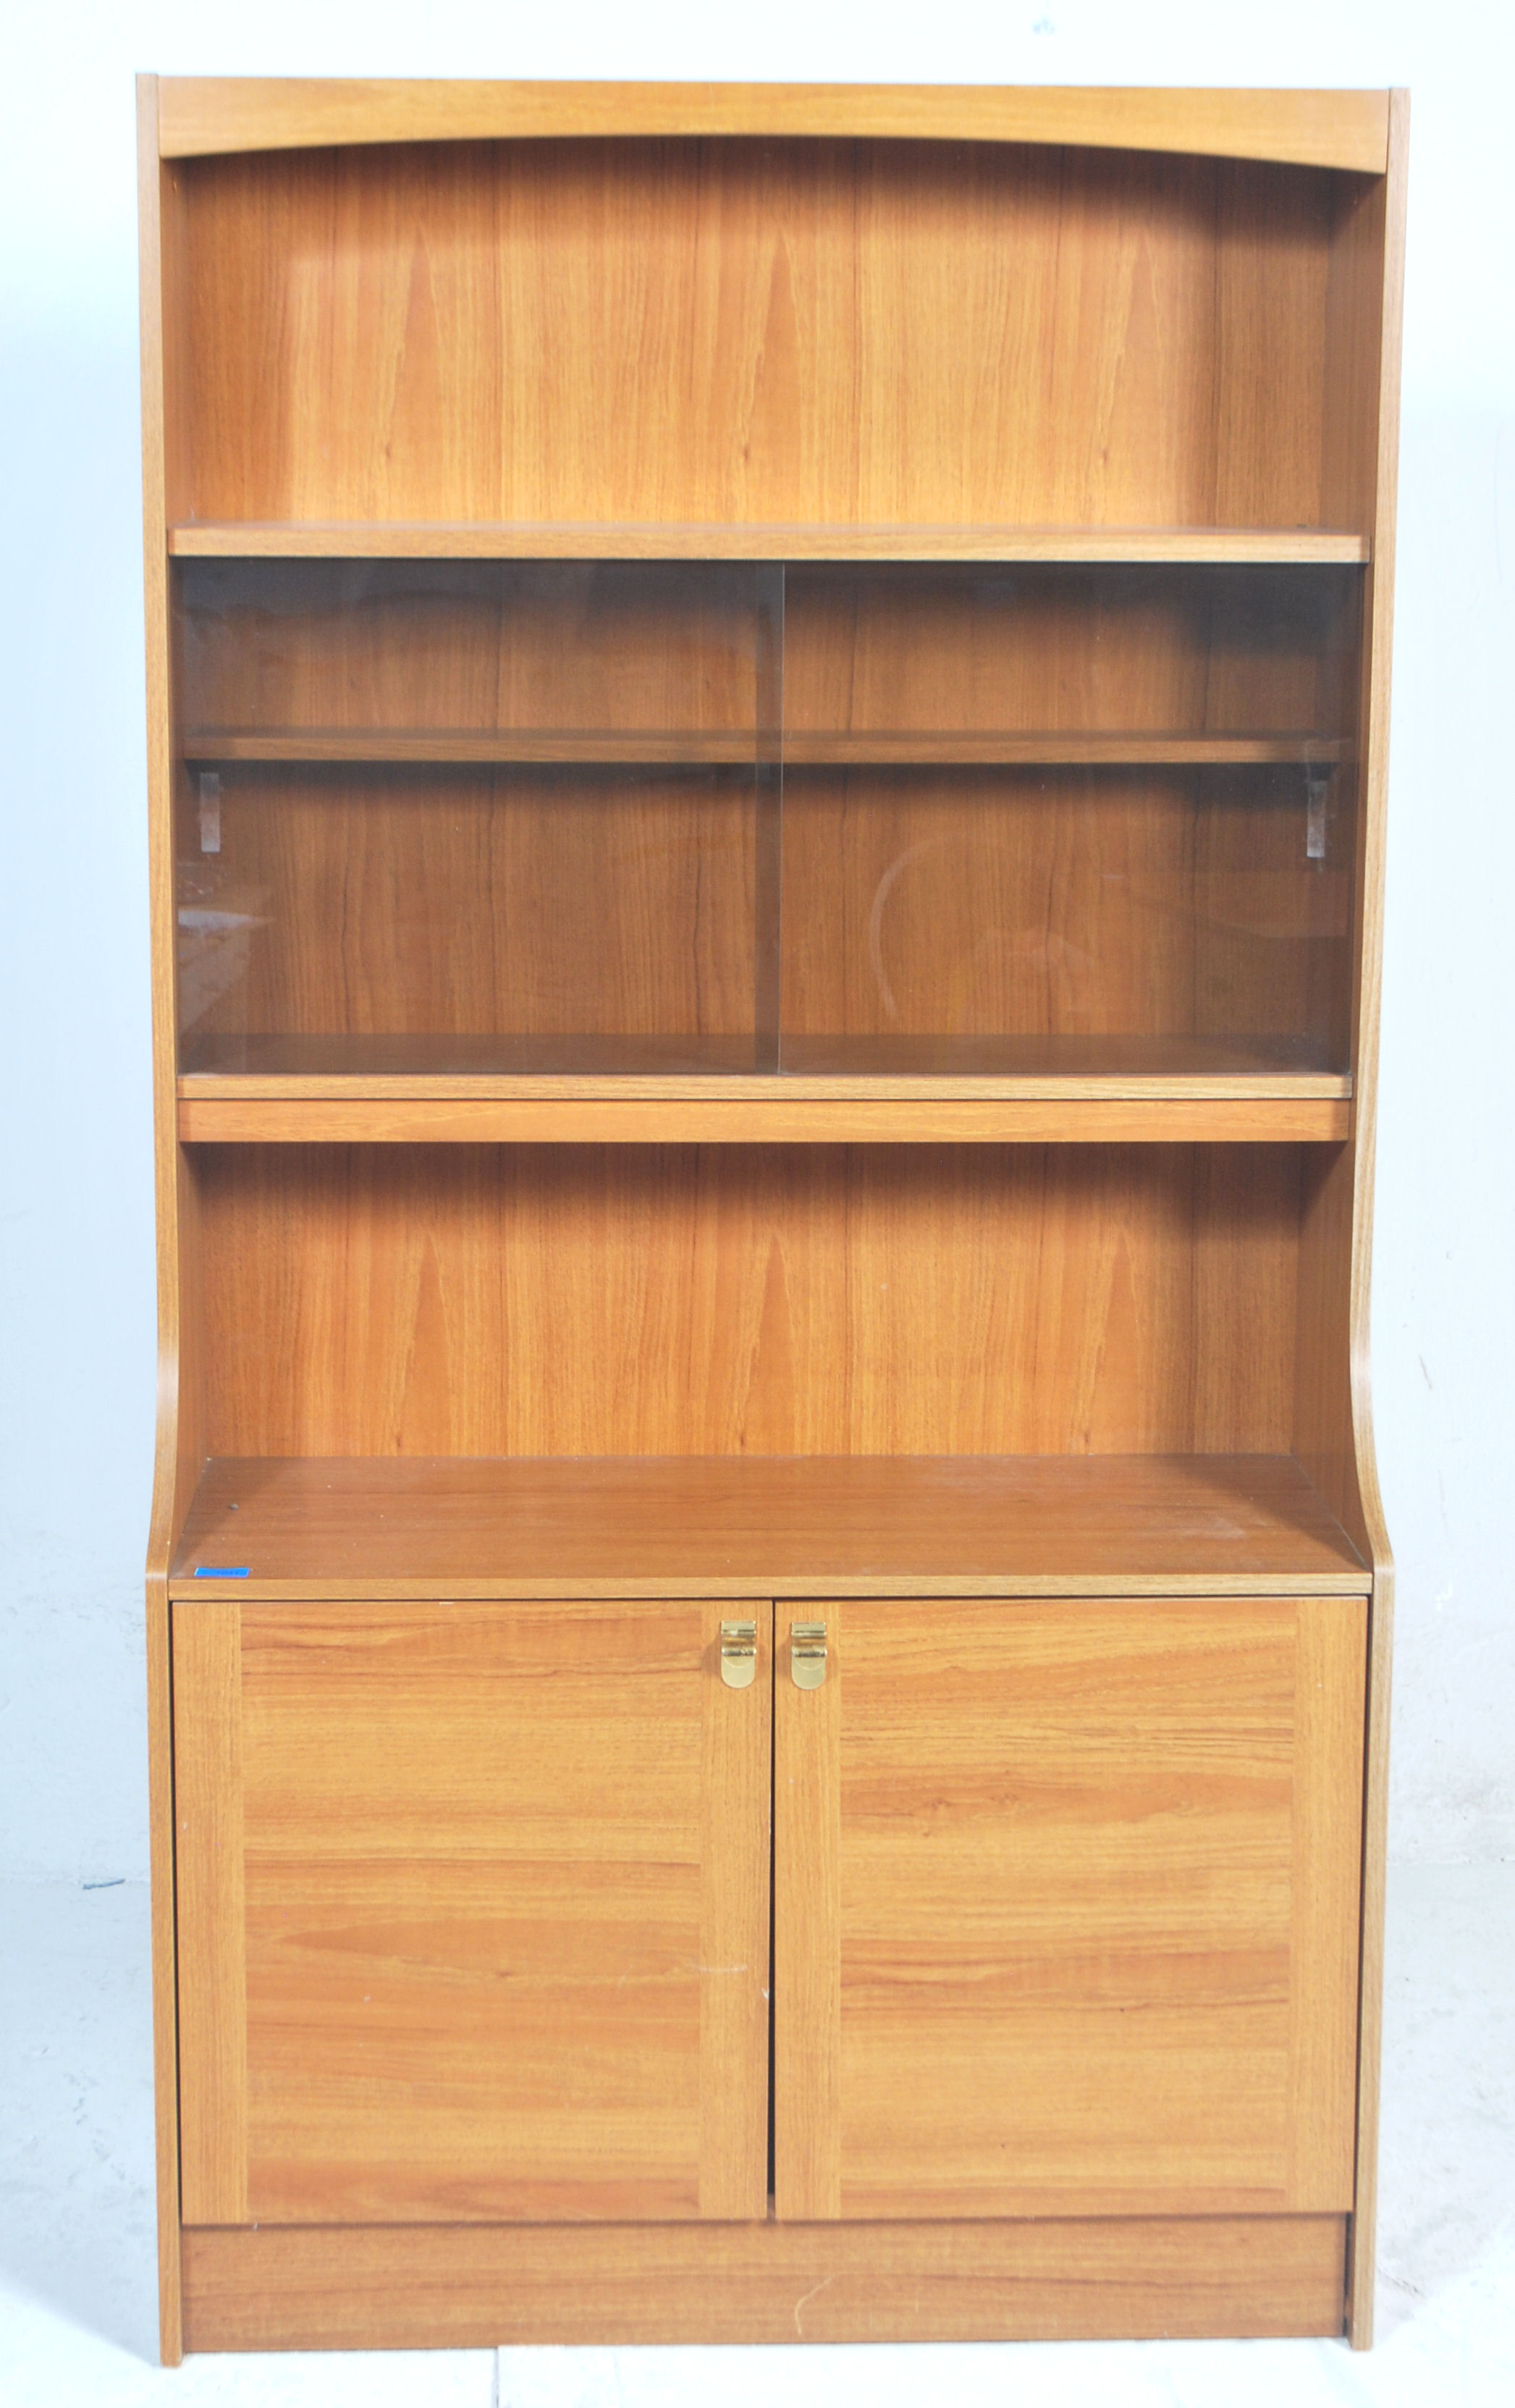 A retro 20th century teak wood veneer  room divider - bookcase cabinet. The upright body with - Image 2 of 5